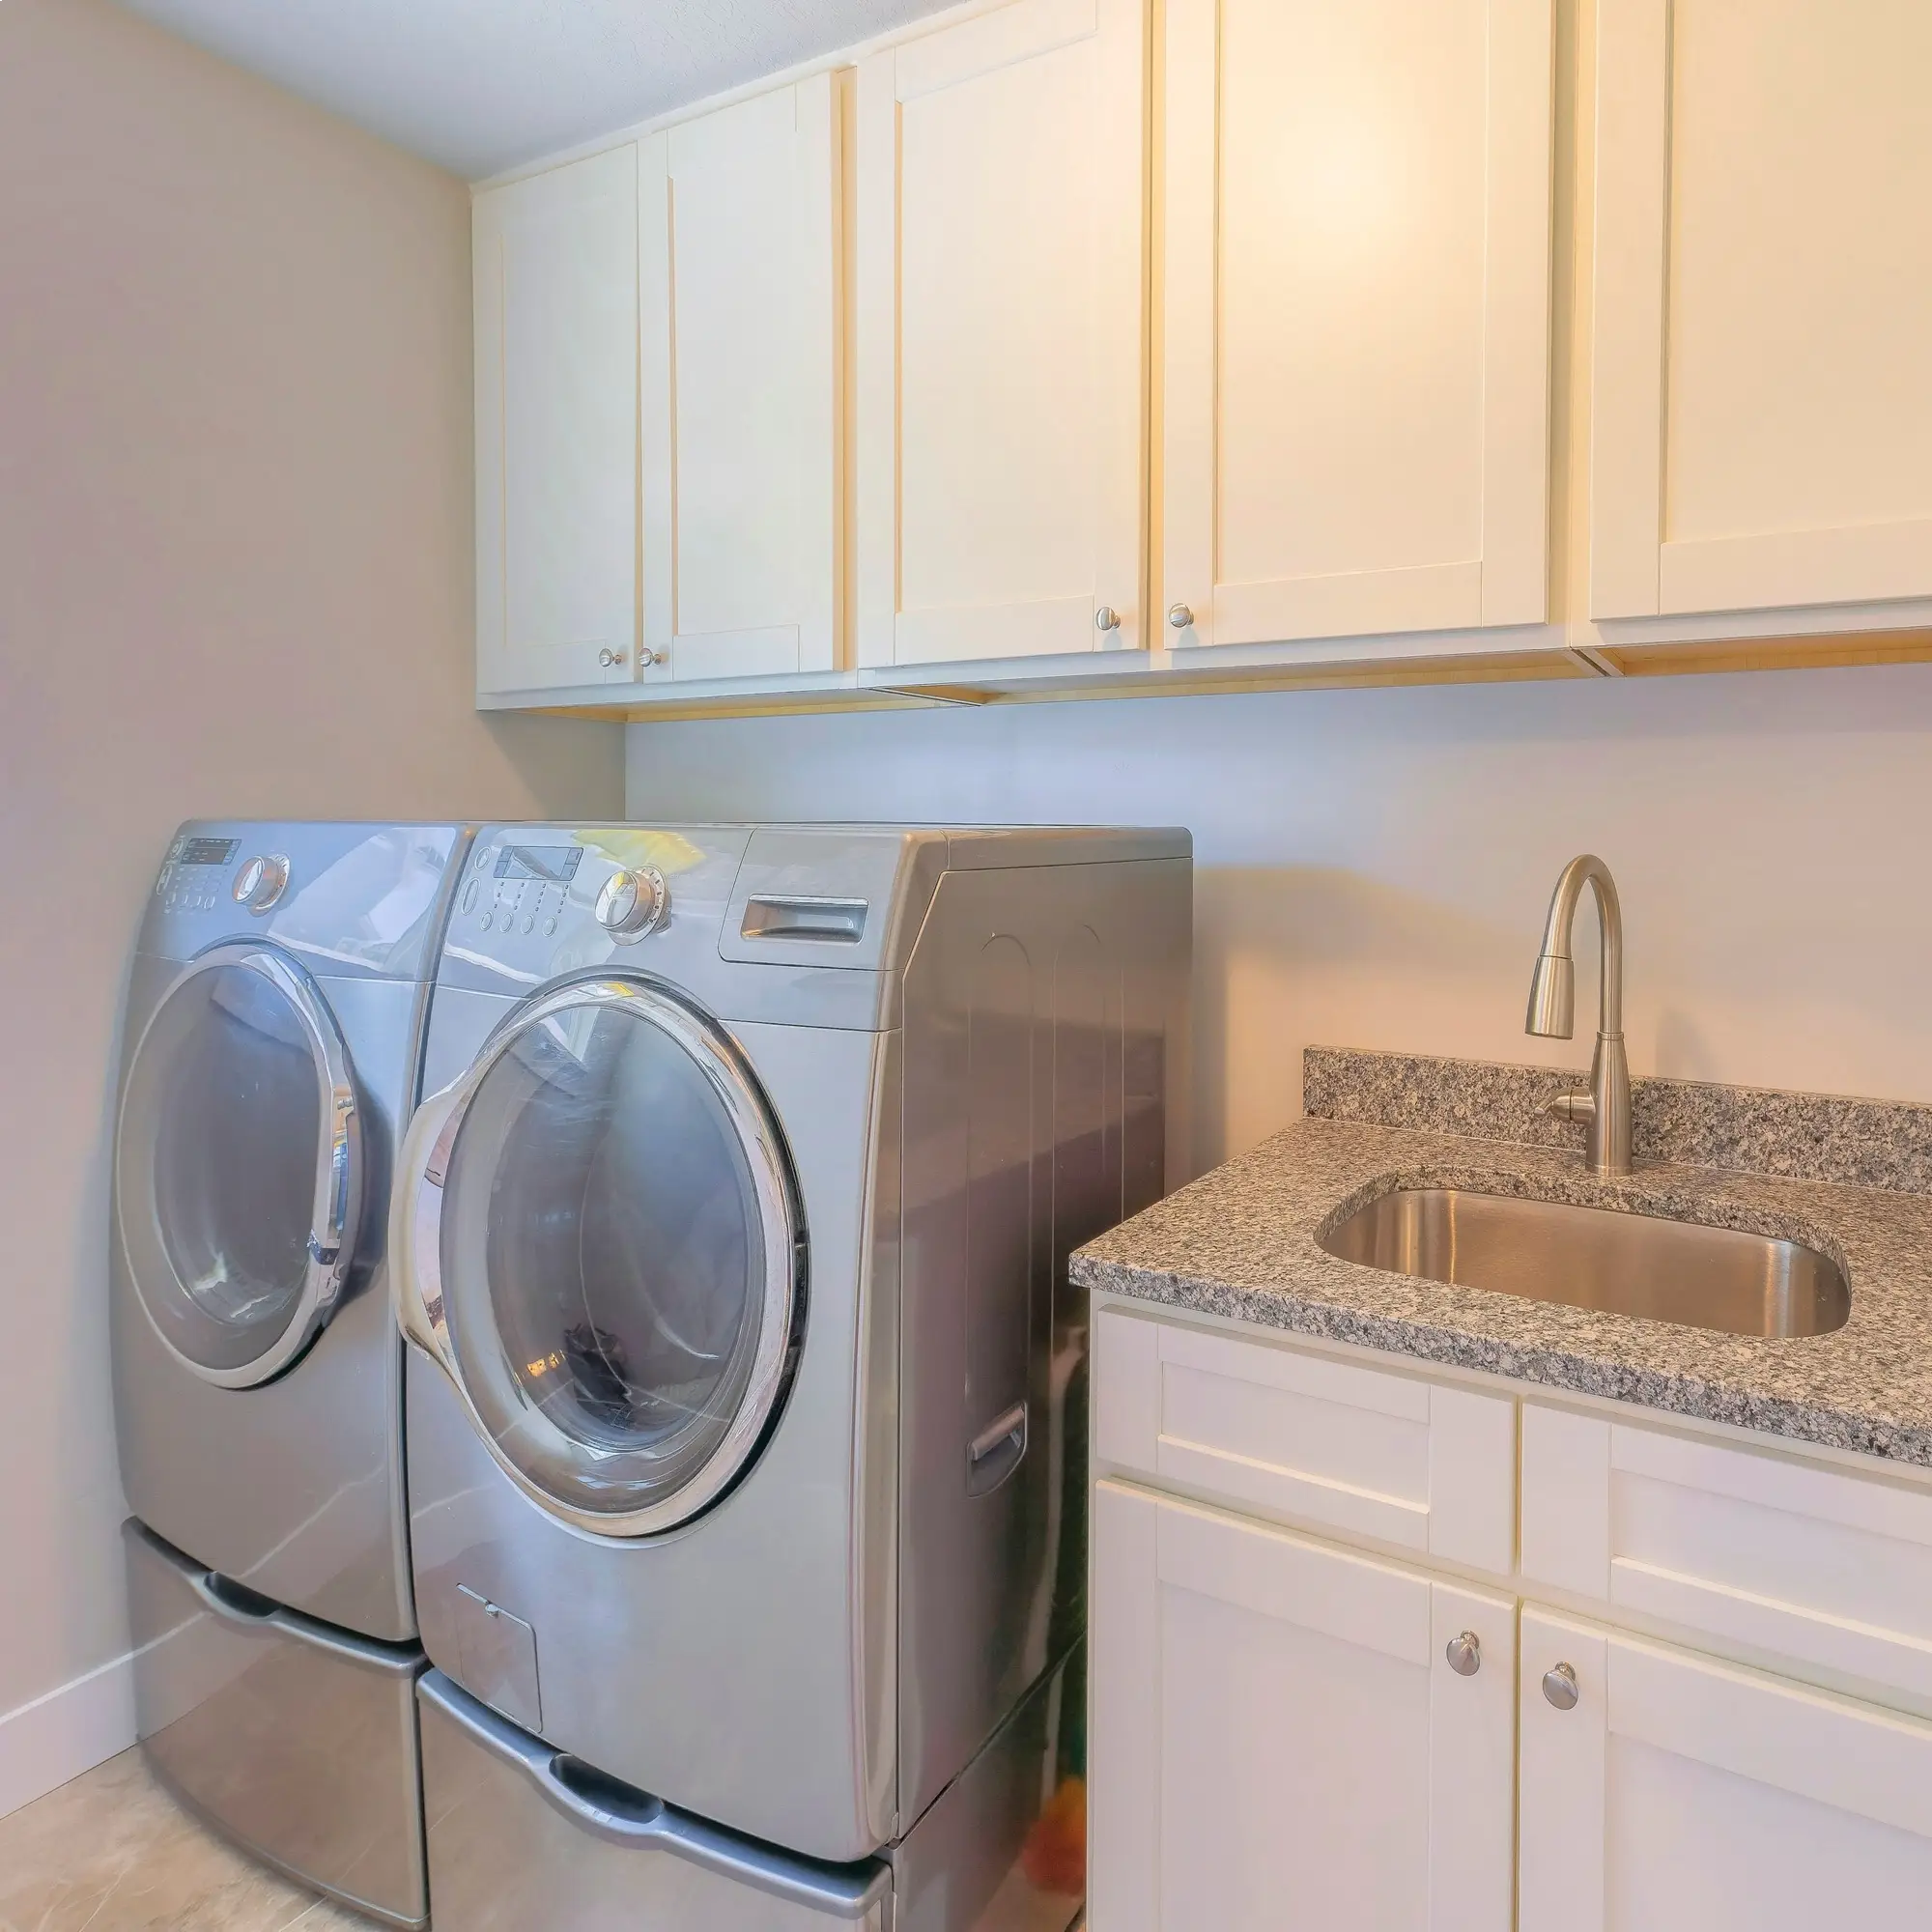 front load washing machine and dryer near cabinets and sink